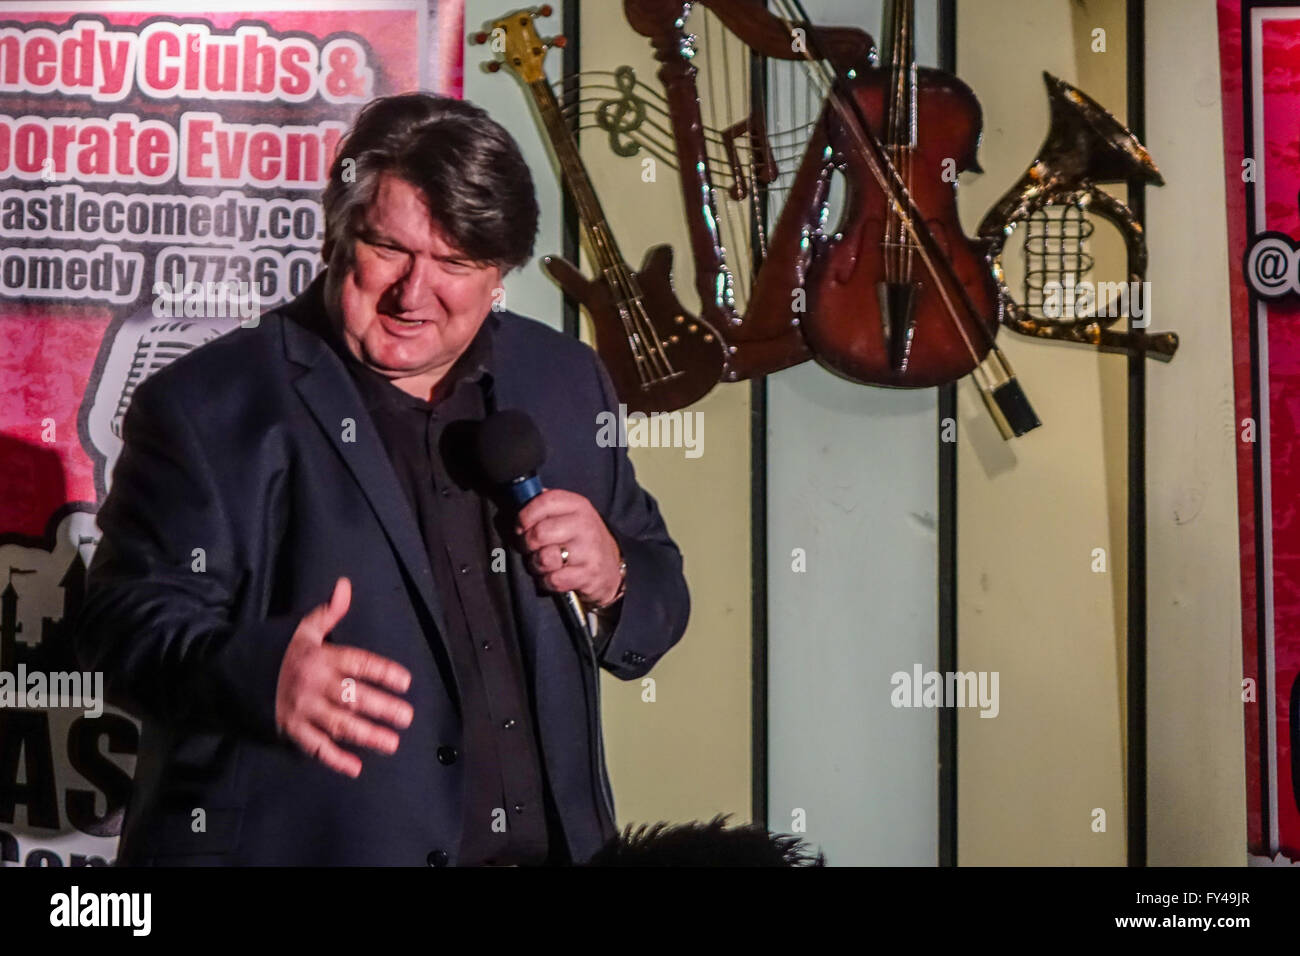 Henlow, Bedfordshire, UK. 21st April, 2016. Tv star, radio presenter and stand up comedian, Bob Mills plays to a packed house at Henlow Bridge Lakes in Bedfordshire. Stock Photo